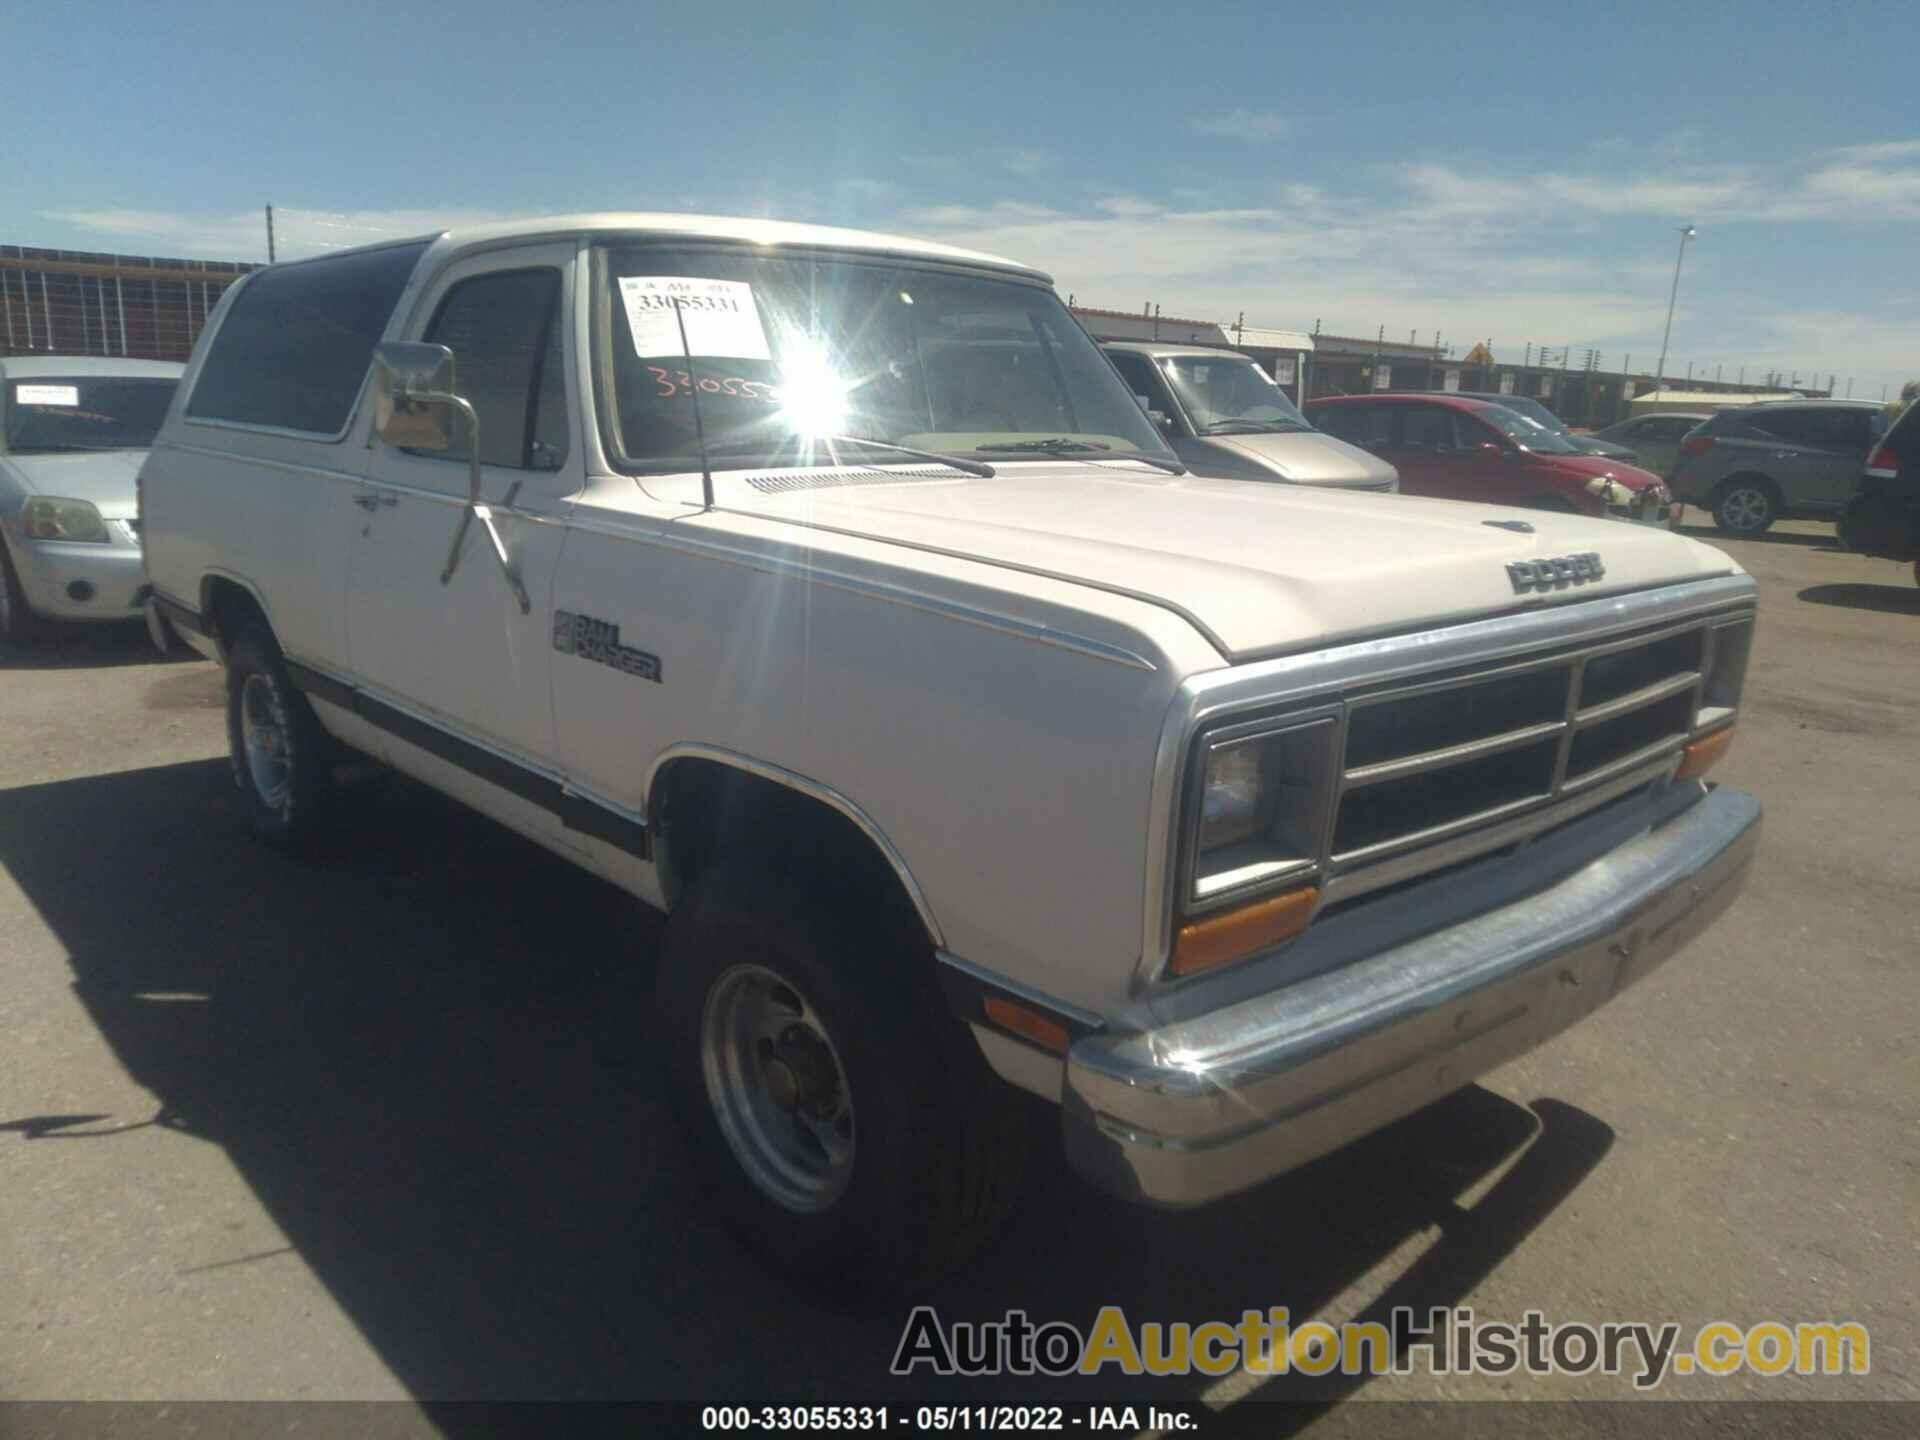 DODGE RAMCHARGER AW-100, 3B4GW12T8HM733526